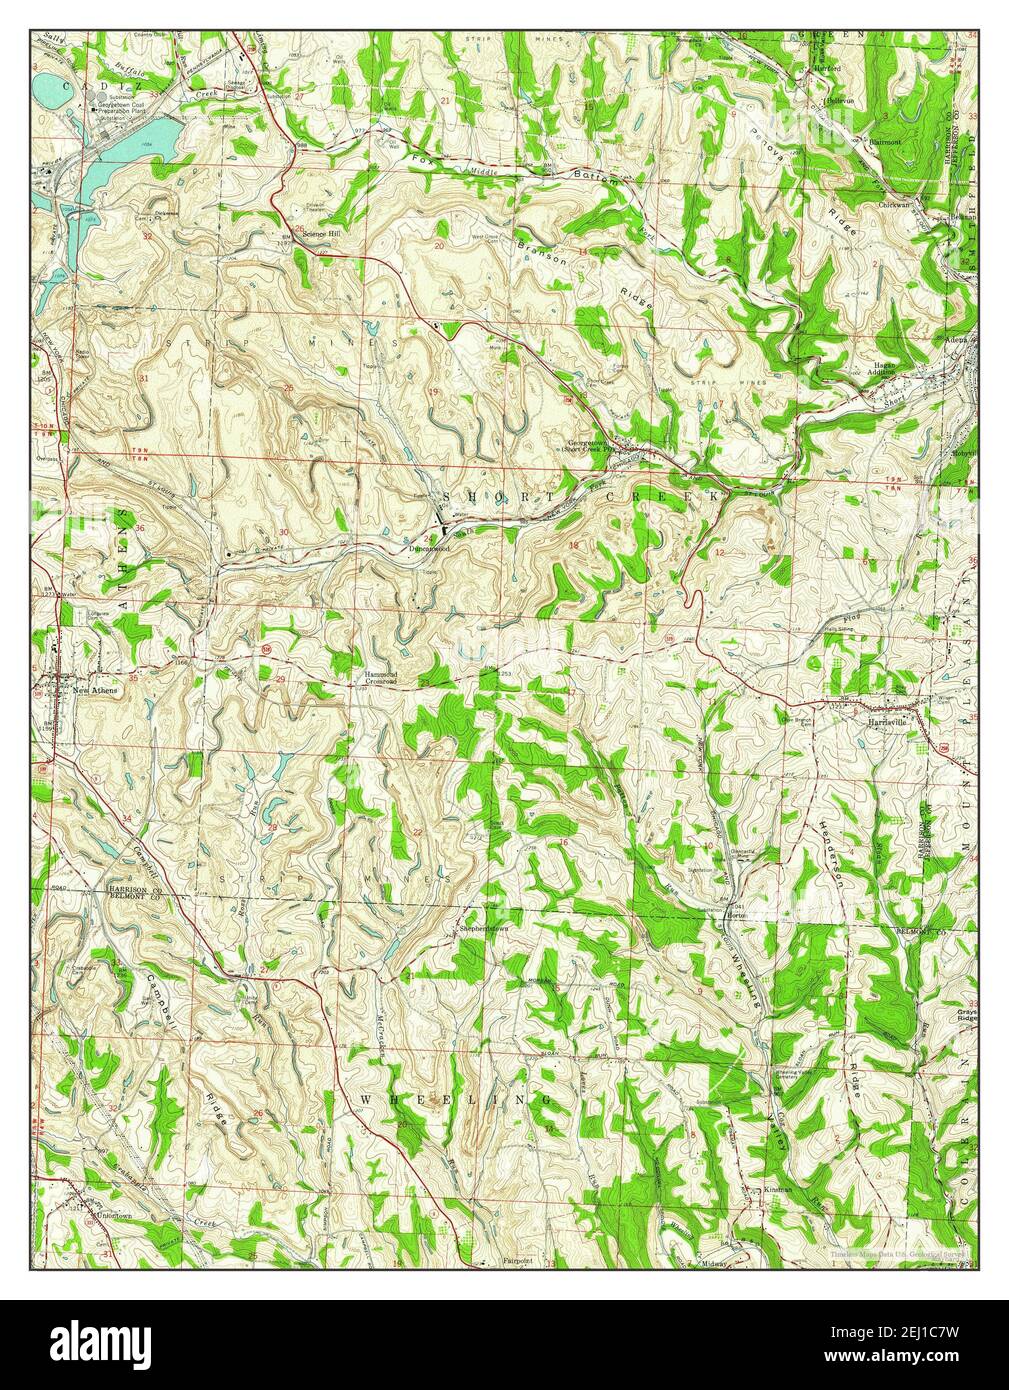 Harrisville, Ohio, map 1960, 1:24000, United States of America by Timeless Maps, data U.S. Geological Survey Stock Photo